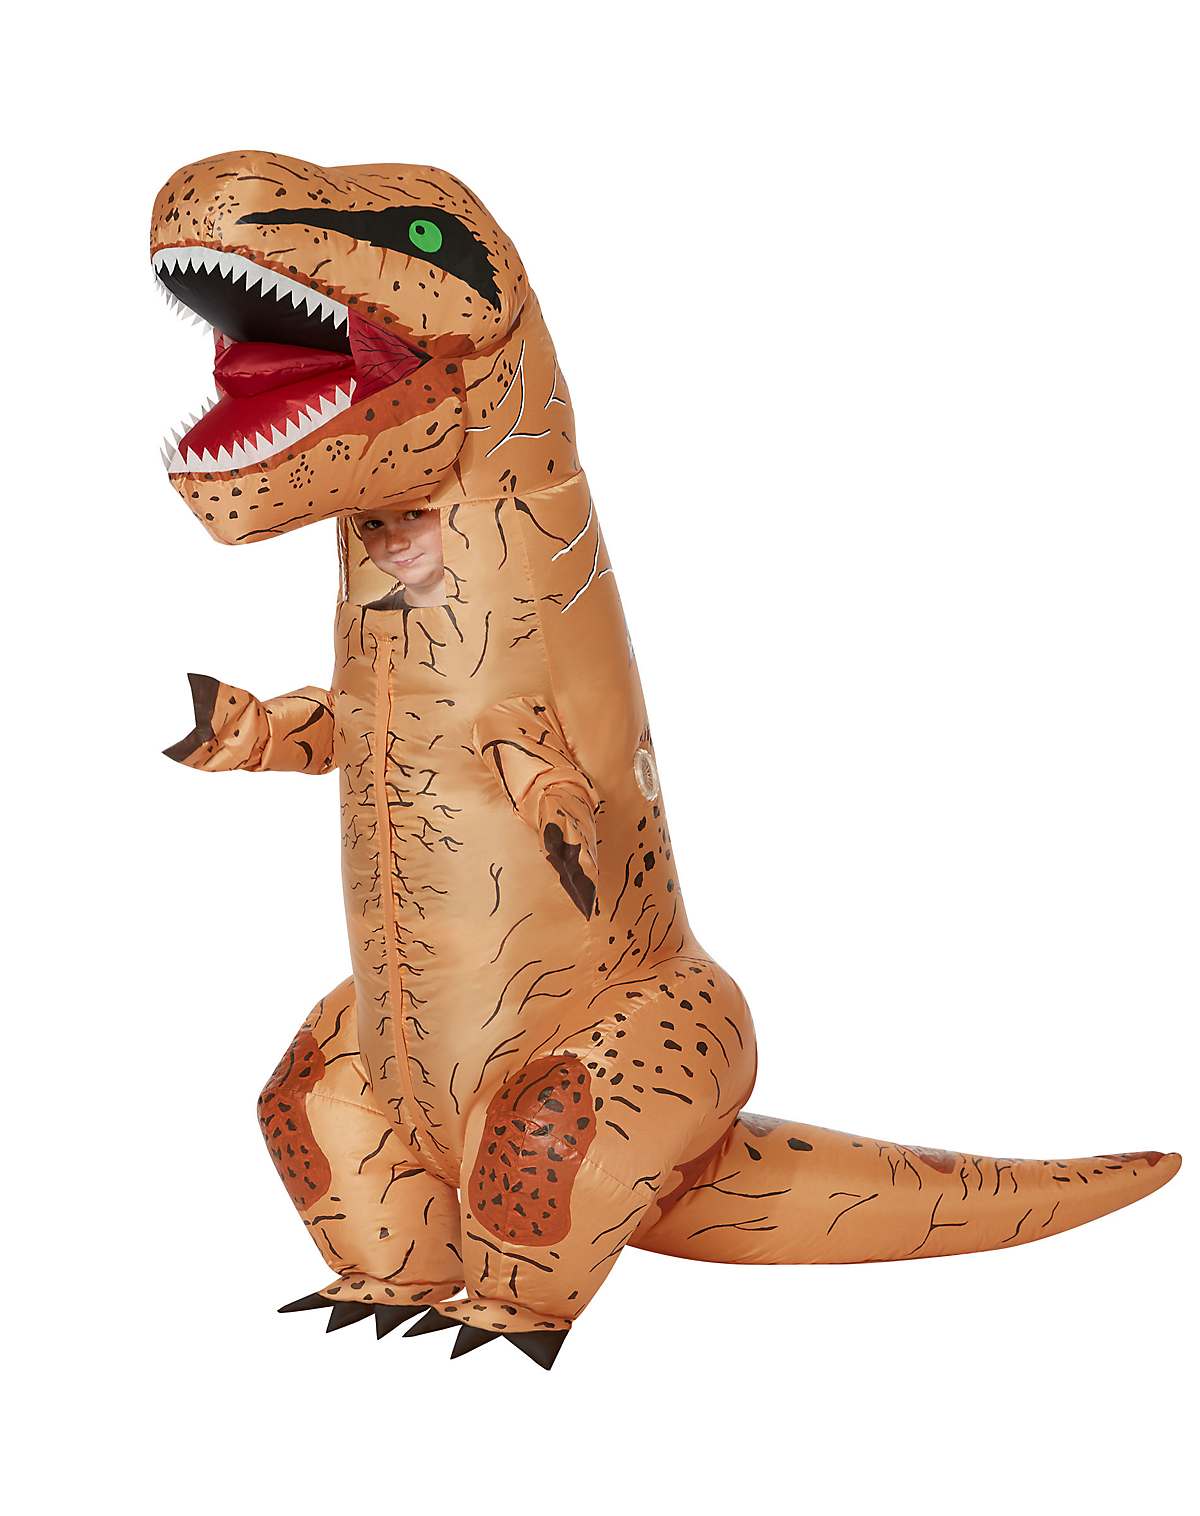 Kids Donny the Dinosaur Inflatable Costume